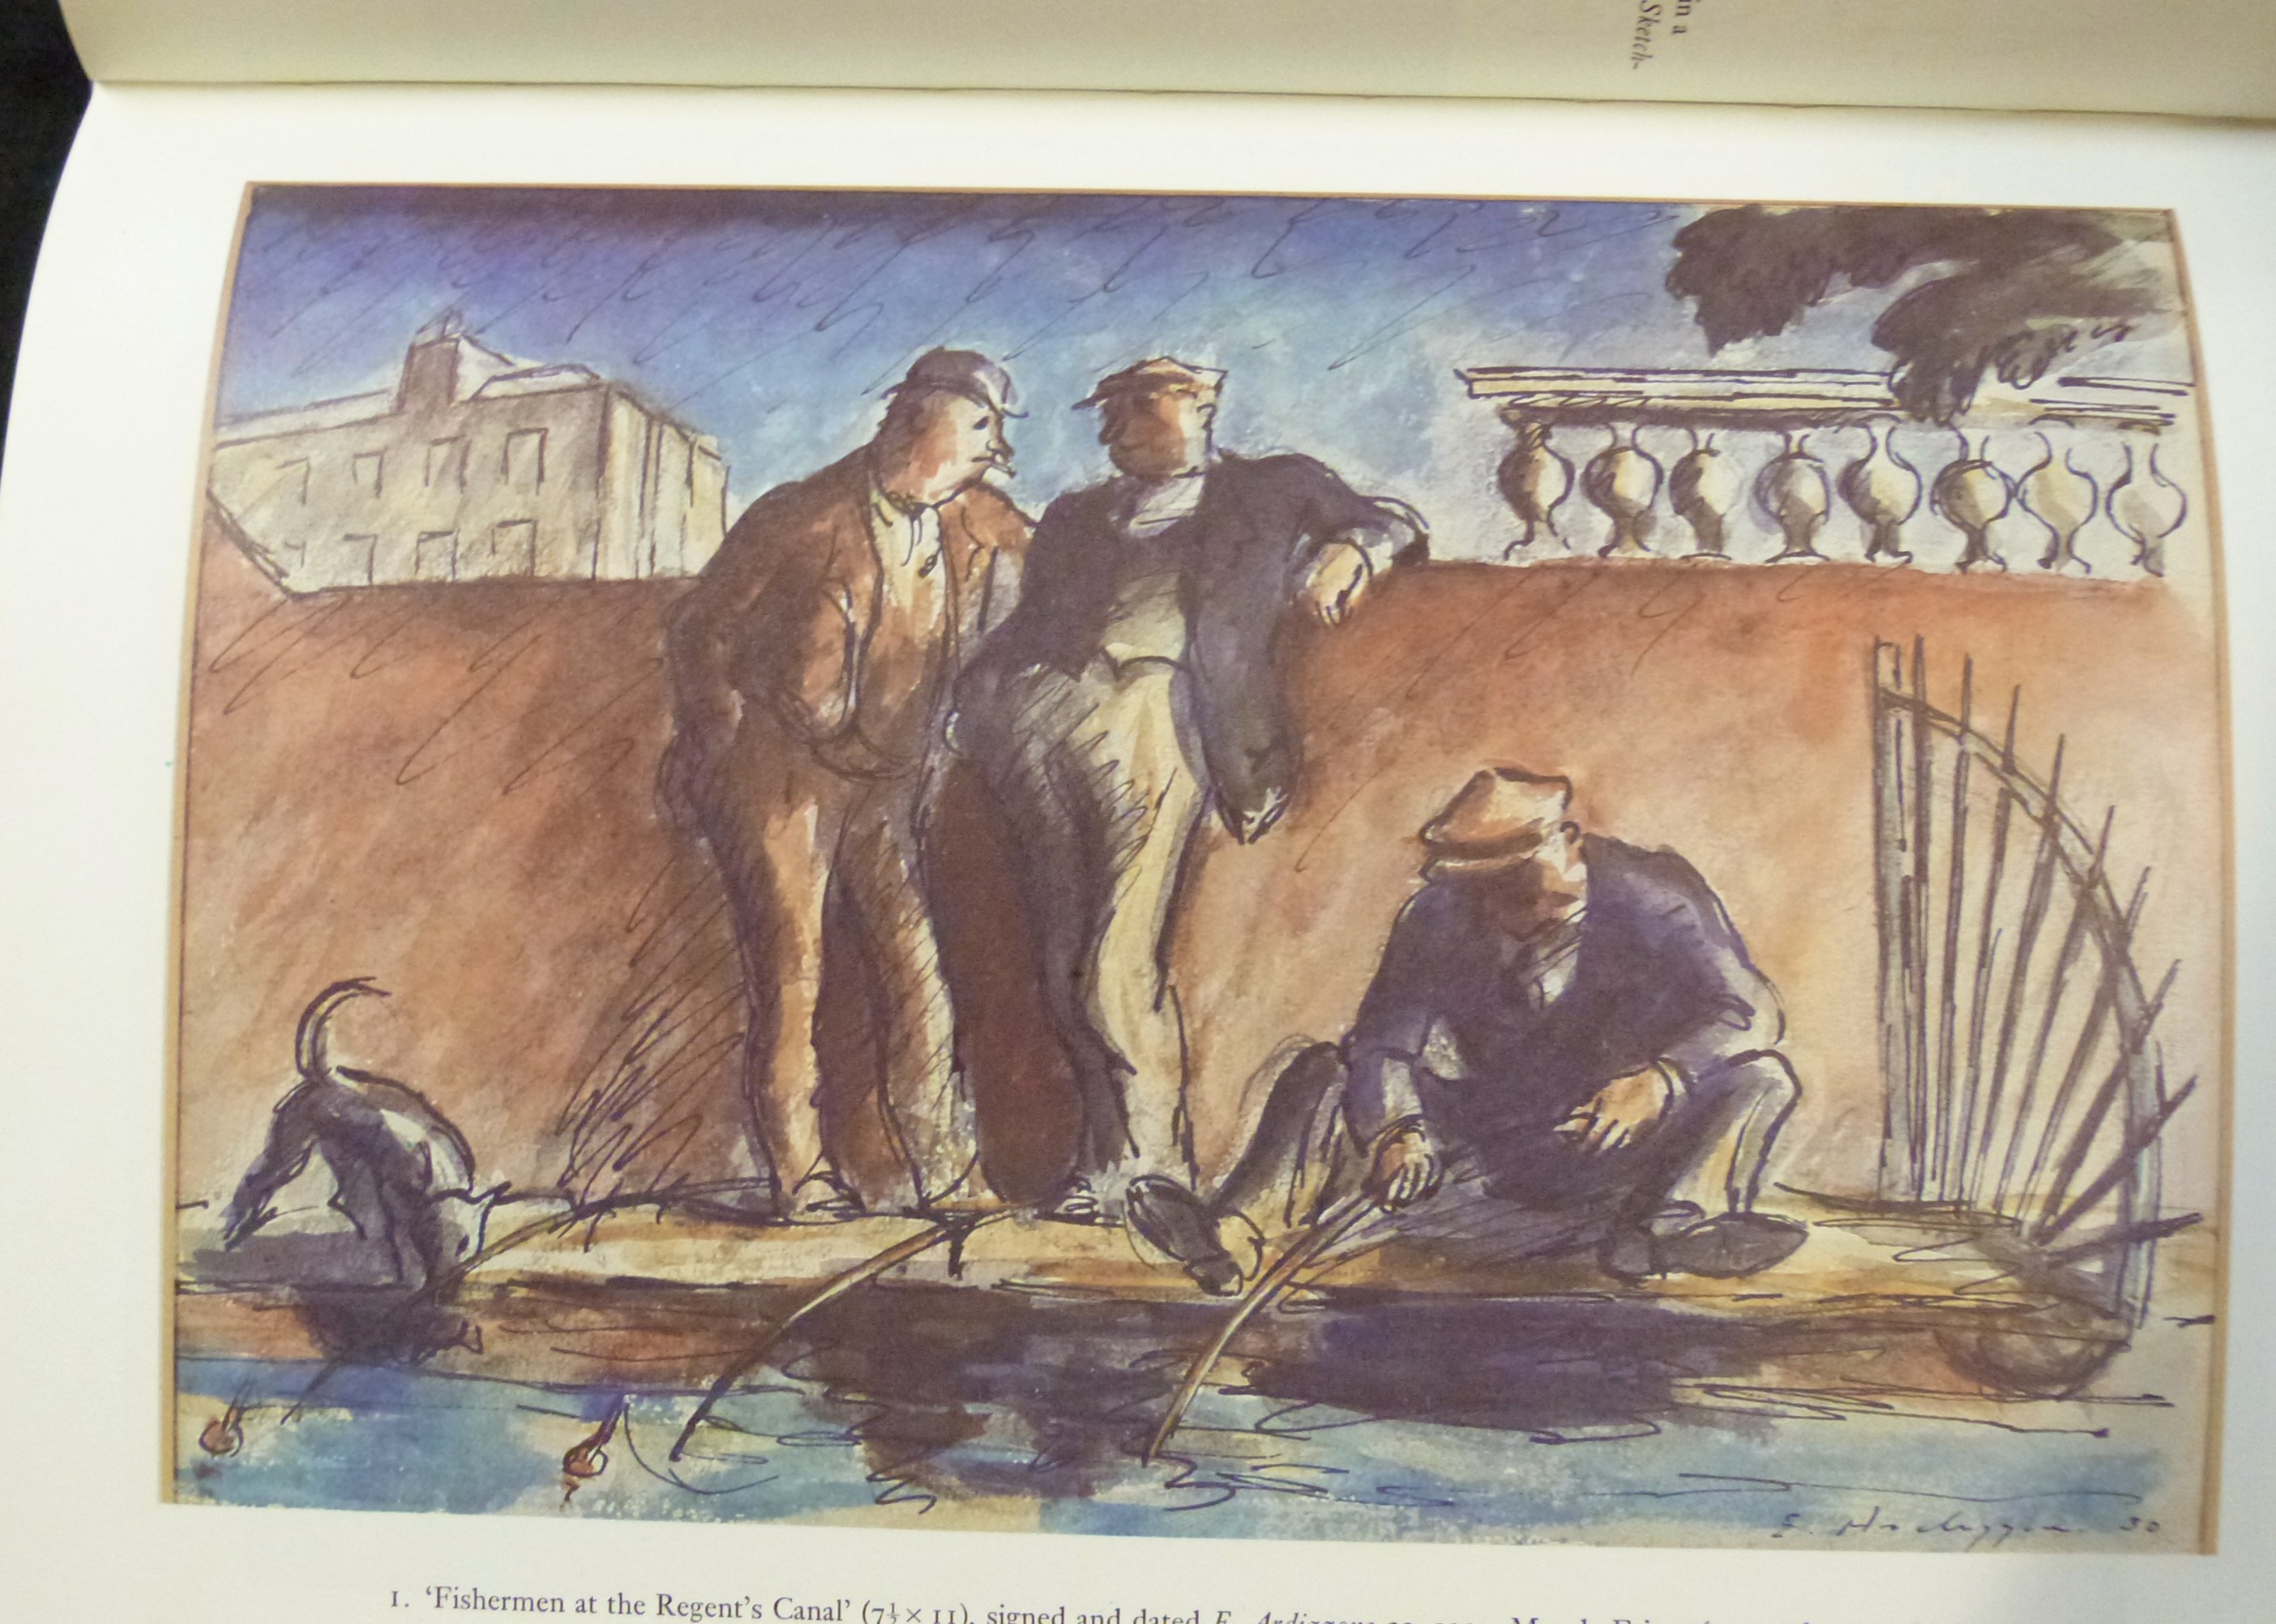 EDWARD ARDIZZONE: 2 titles: THE YOUNG ARDIZZONE AN AUTOBIOGRAPHICAL FRAGMENT, New York, The - Image 3 of 6